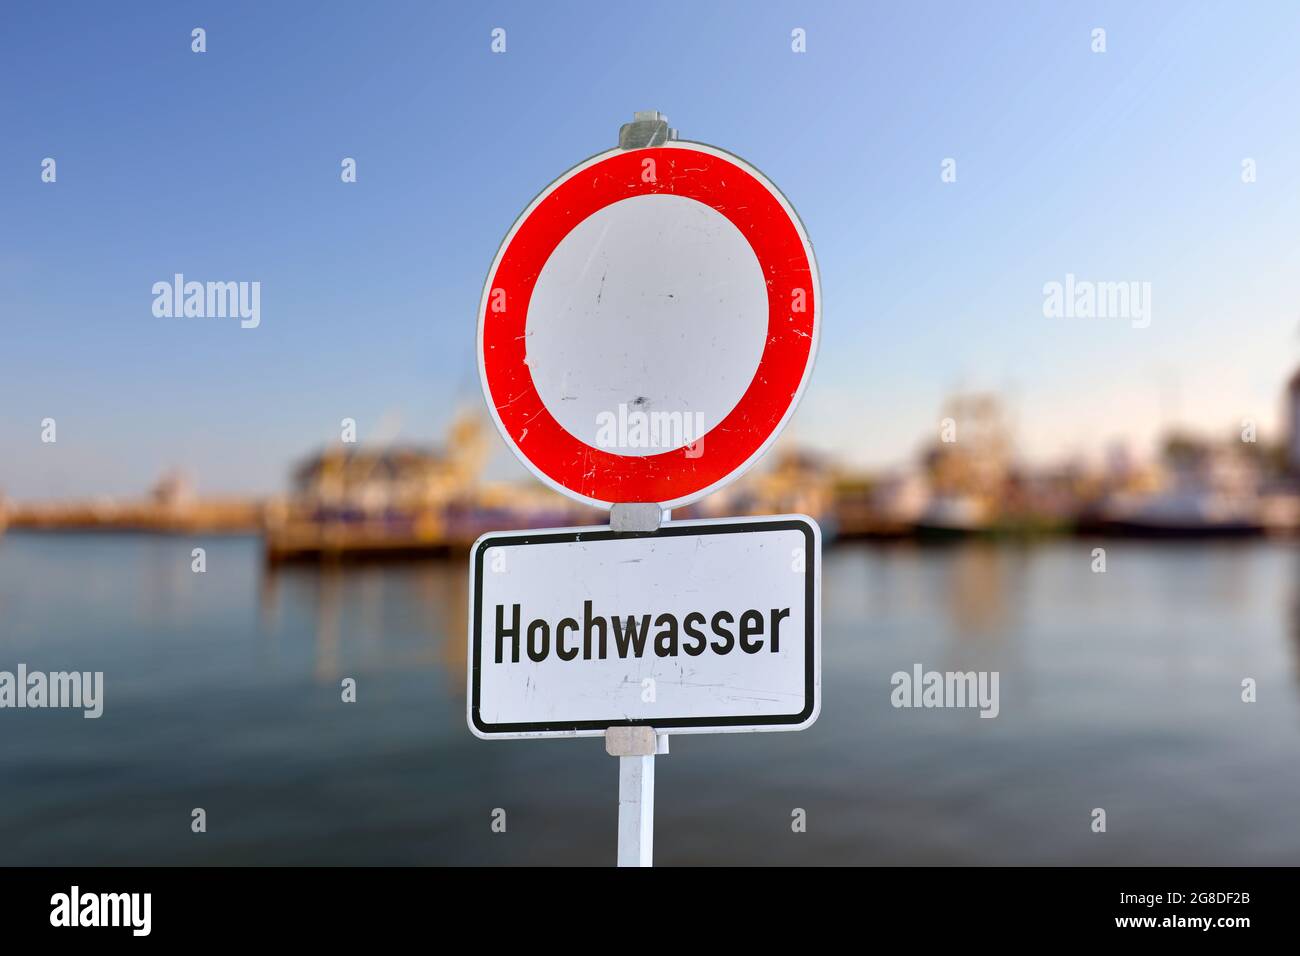 German water flood sign with red circle and text saying 'Hochwasser' Stock Photo